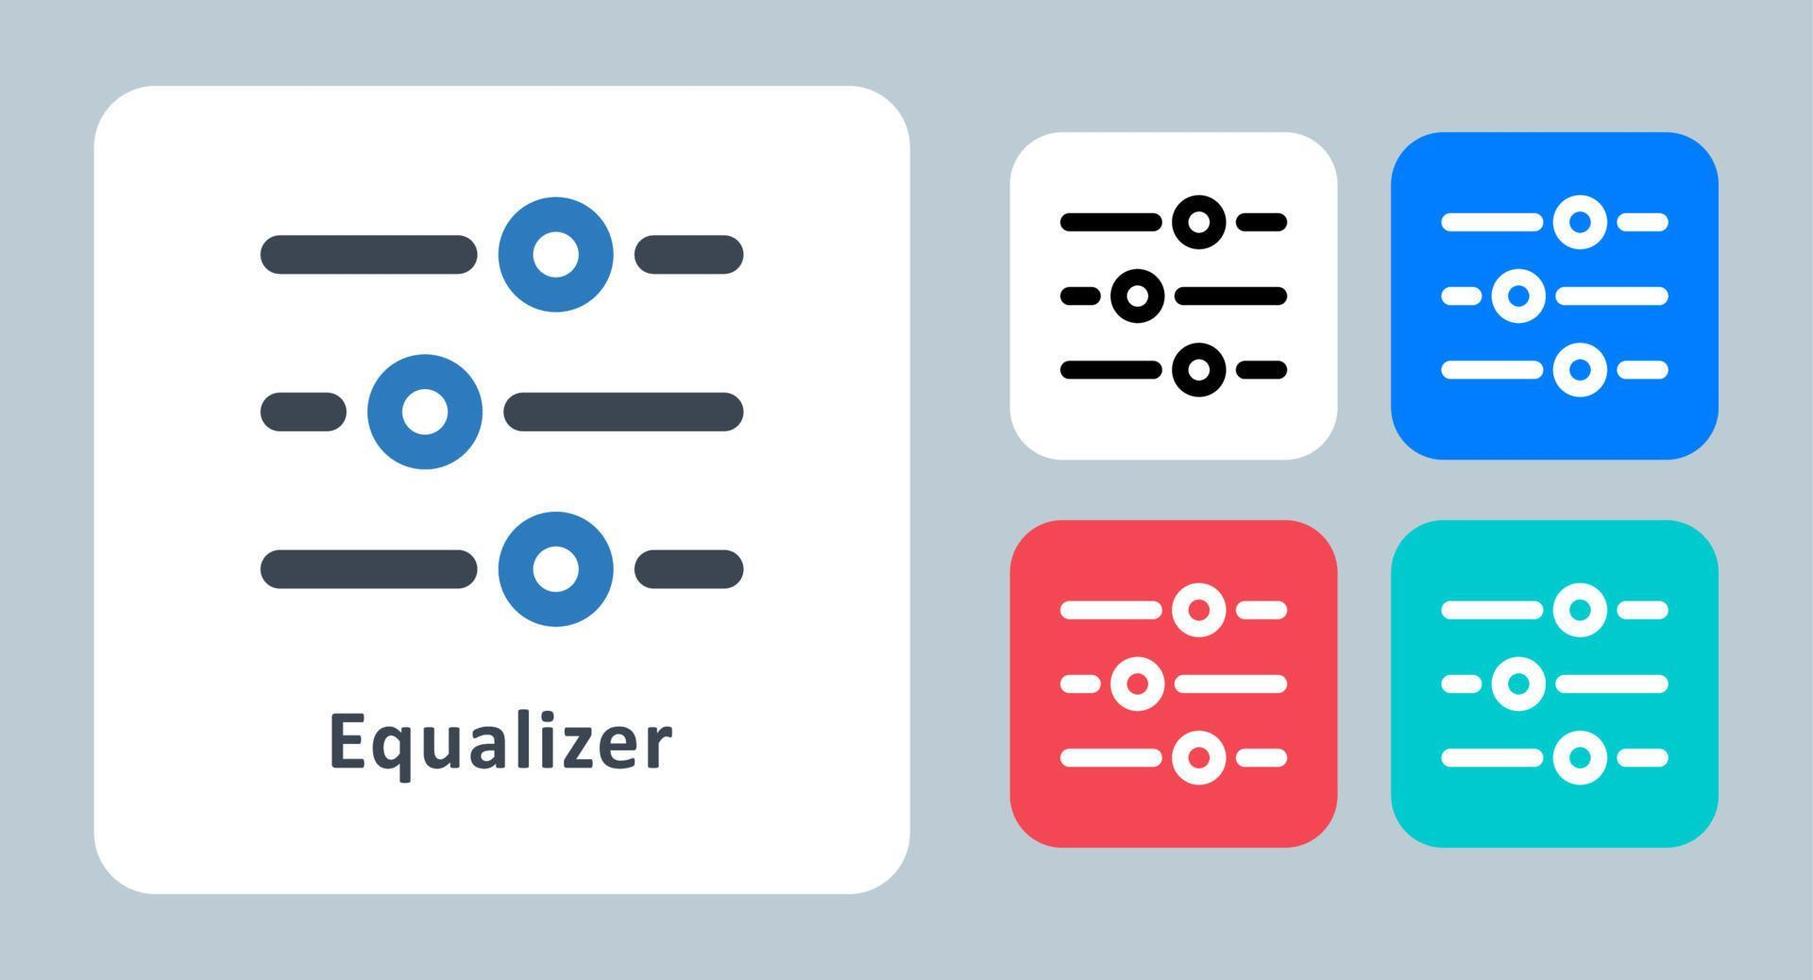 Equalizer icon - vector illustration . Equalizer, Customize, Personalize, Preferences, Setting, Control, Options, Settings, line, outline, flat, icons .